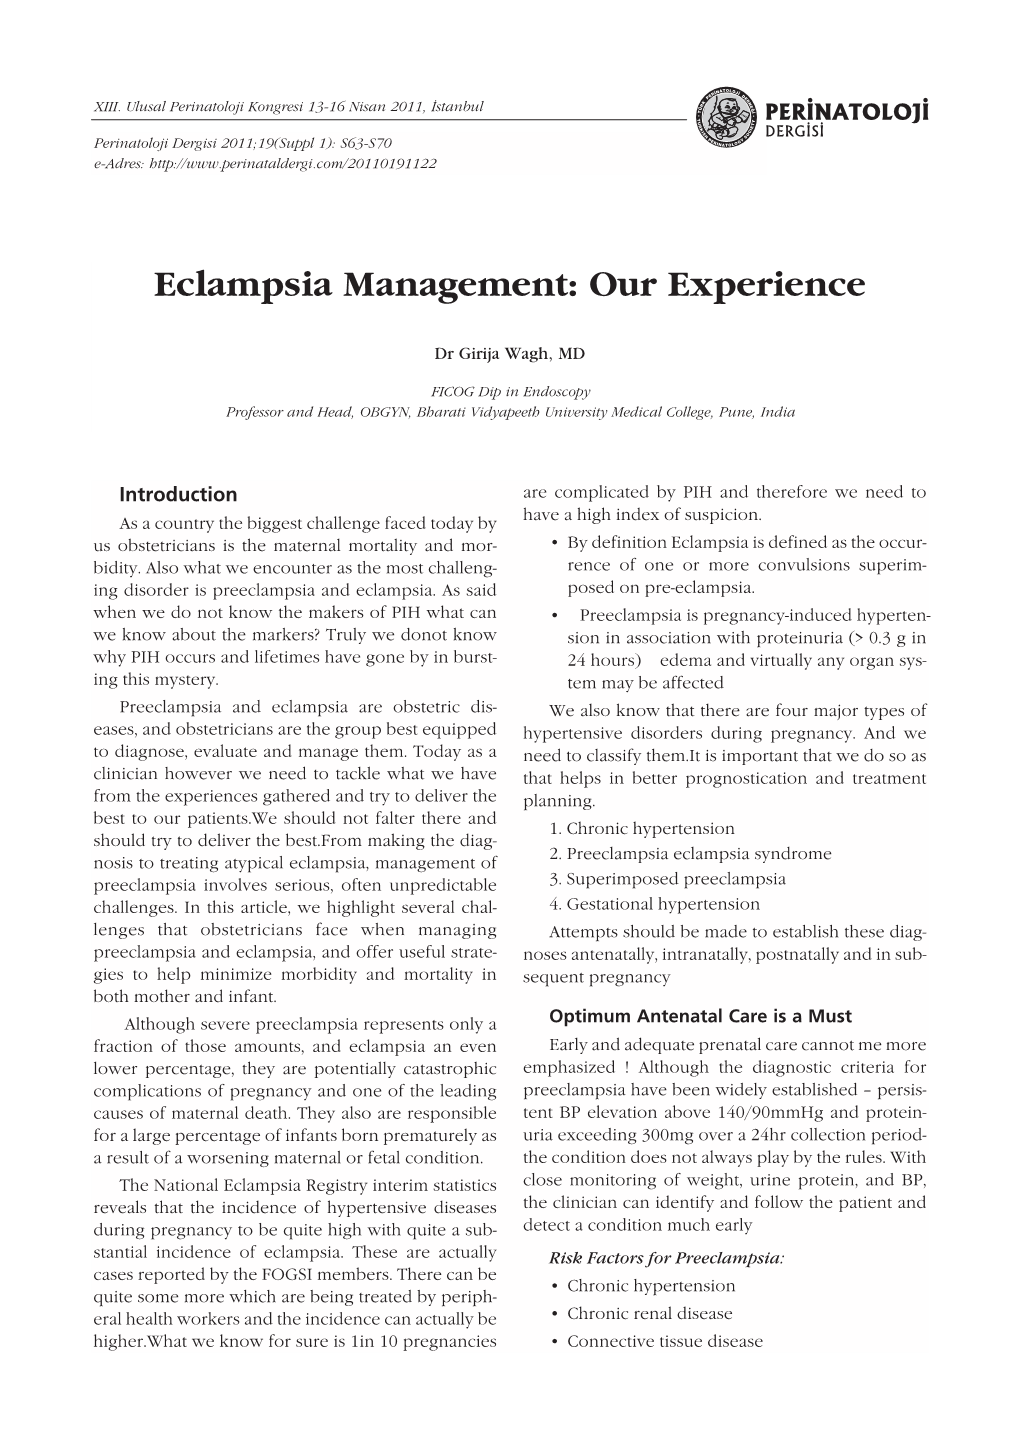 Eclampsia Management: Our Experience